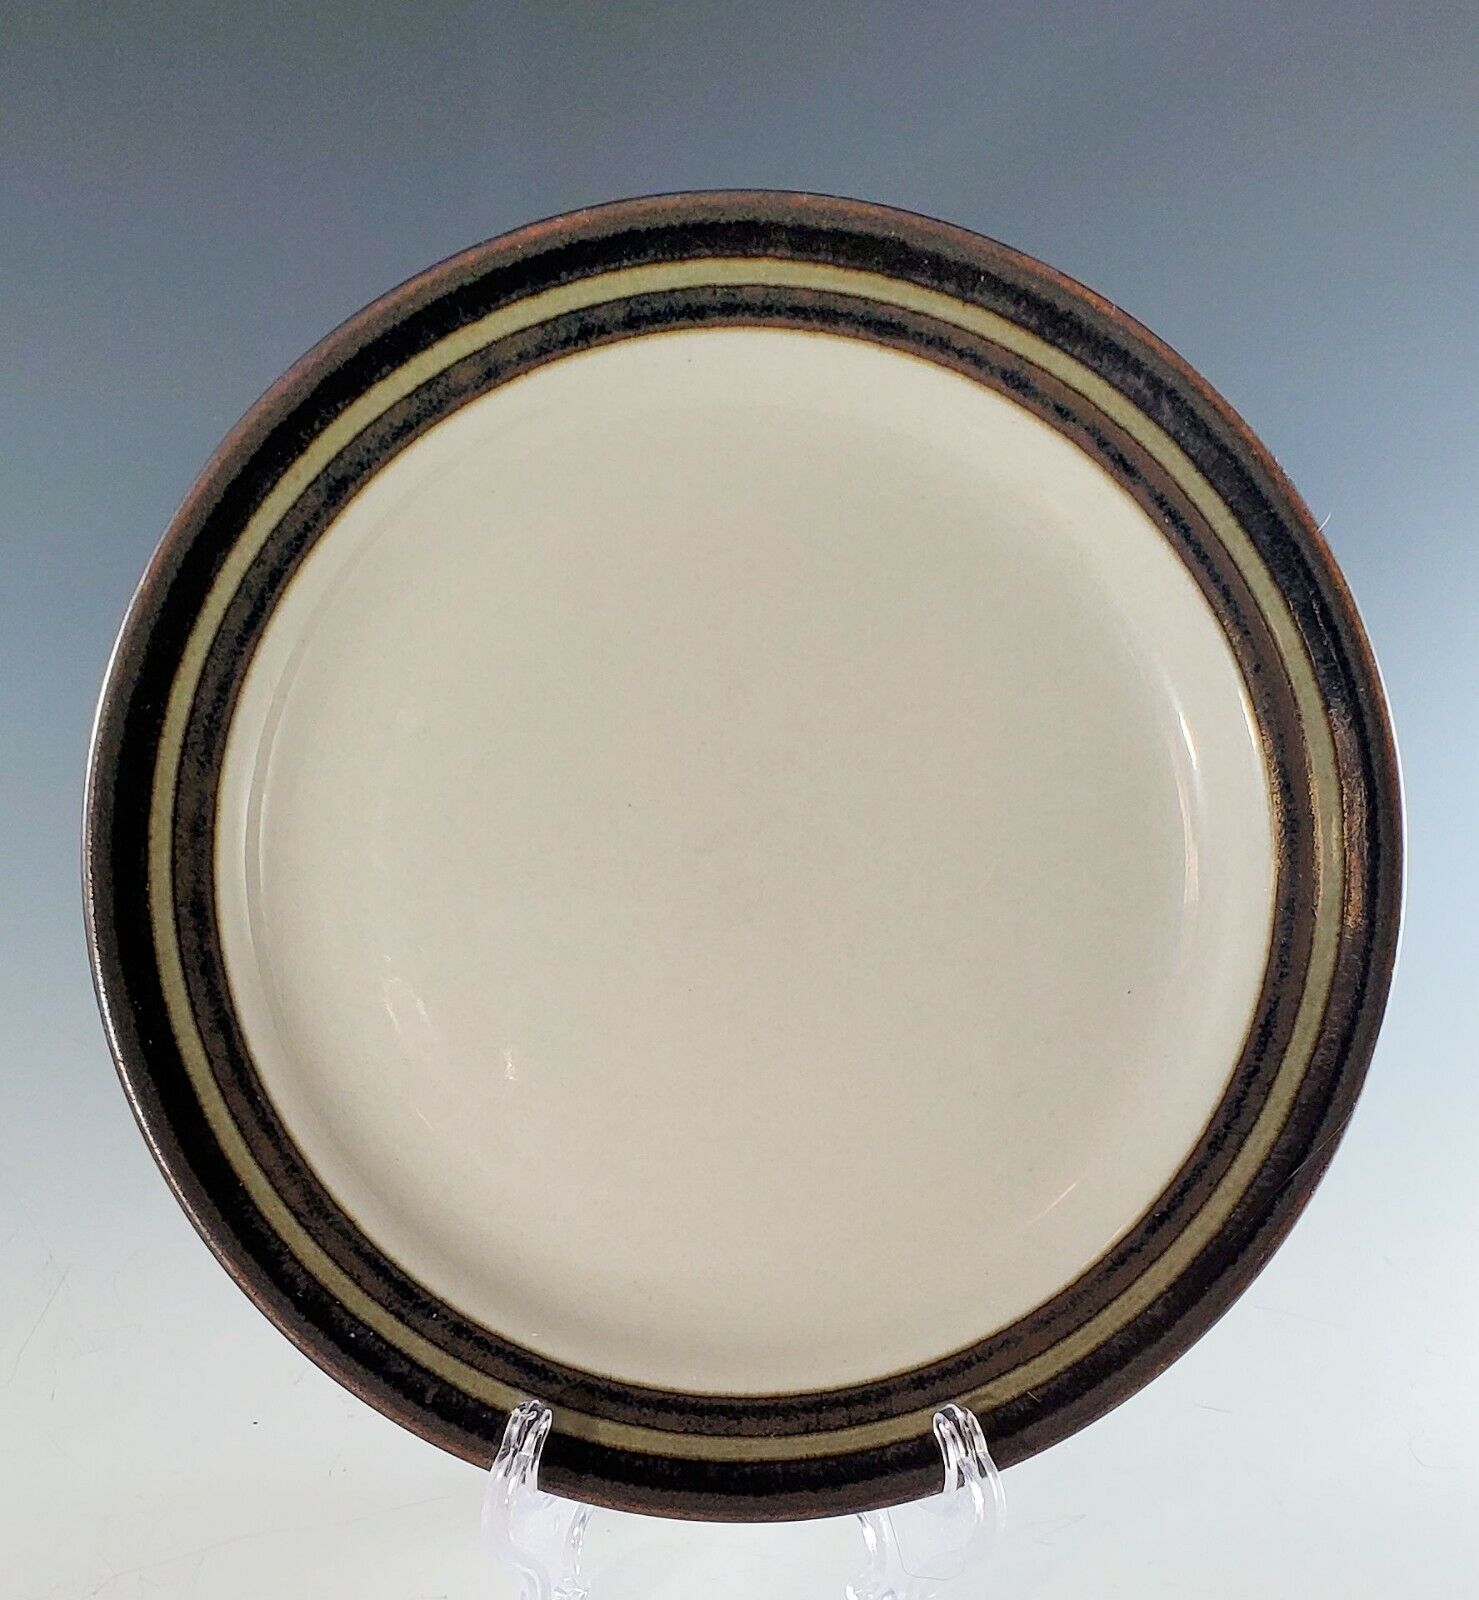 Read more about the article Arabia of Finland KARELIA Salad Plate(s) Anja Jaatinen-Winqvist 1974-1981